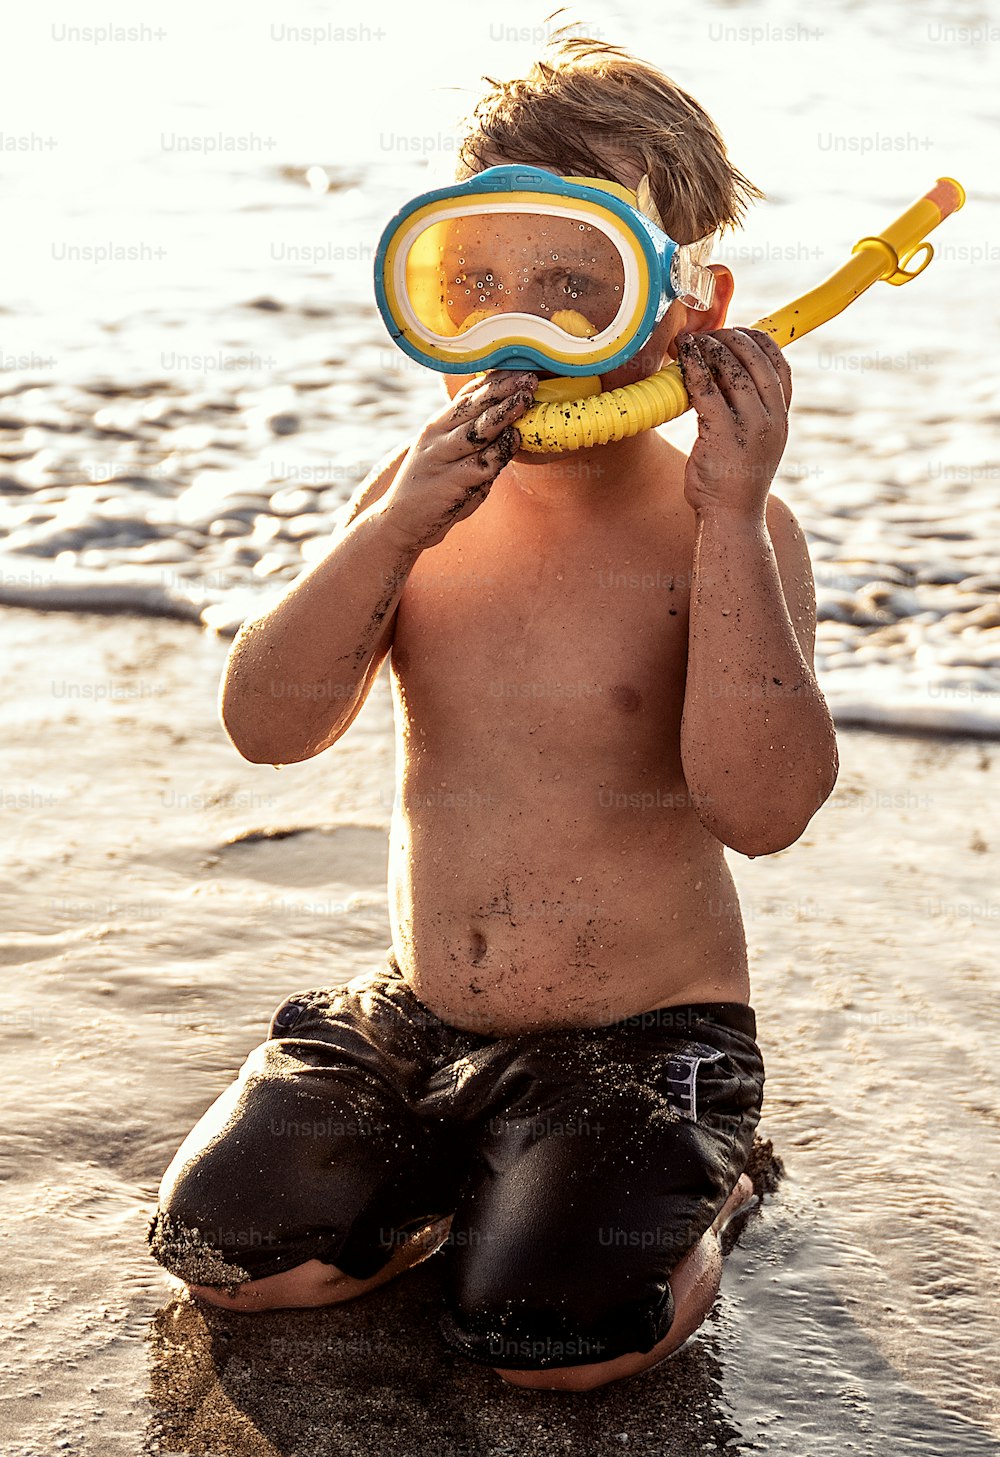 Vacation little boy in snorkeling mask having fun in water during summer holiday.